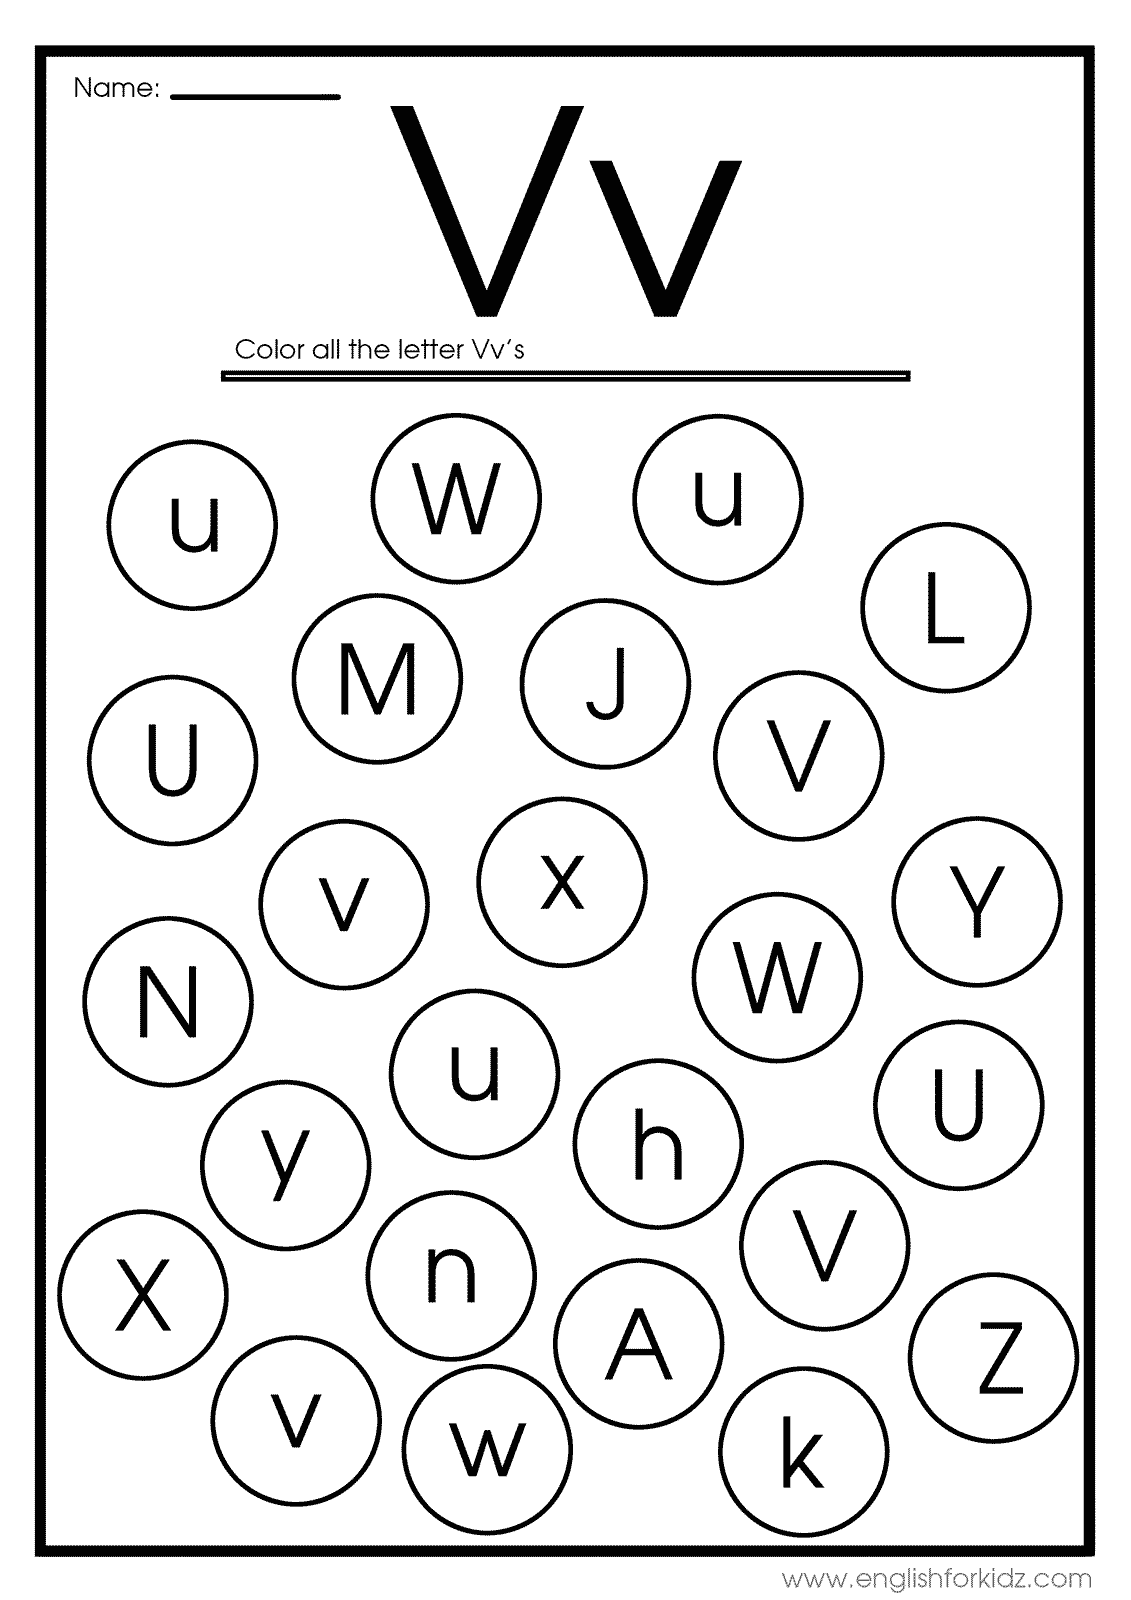 English for kids step by step letter v worksheets flash cards coloring pages